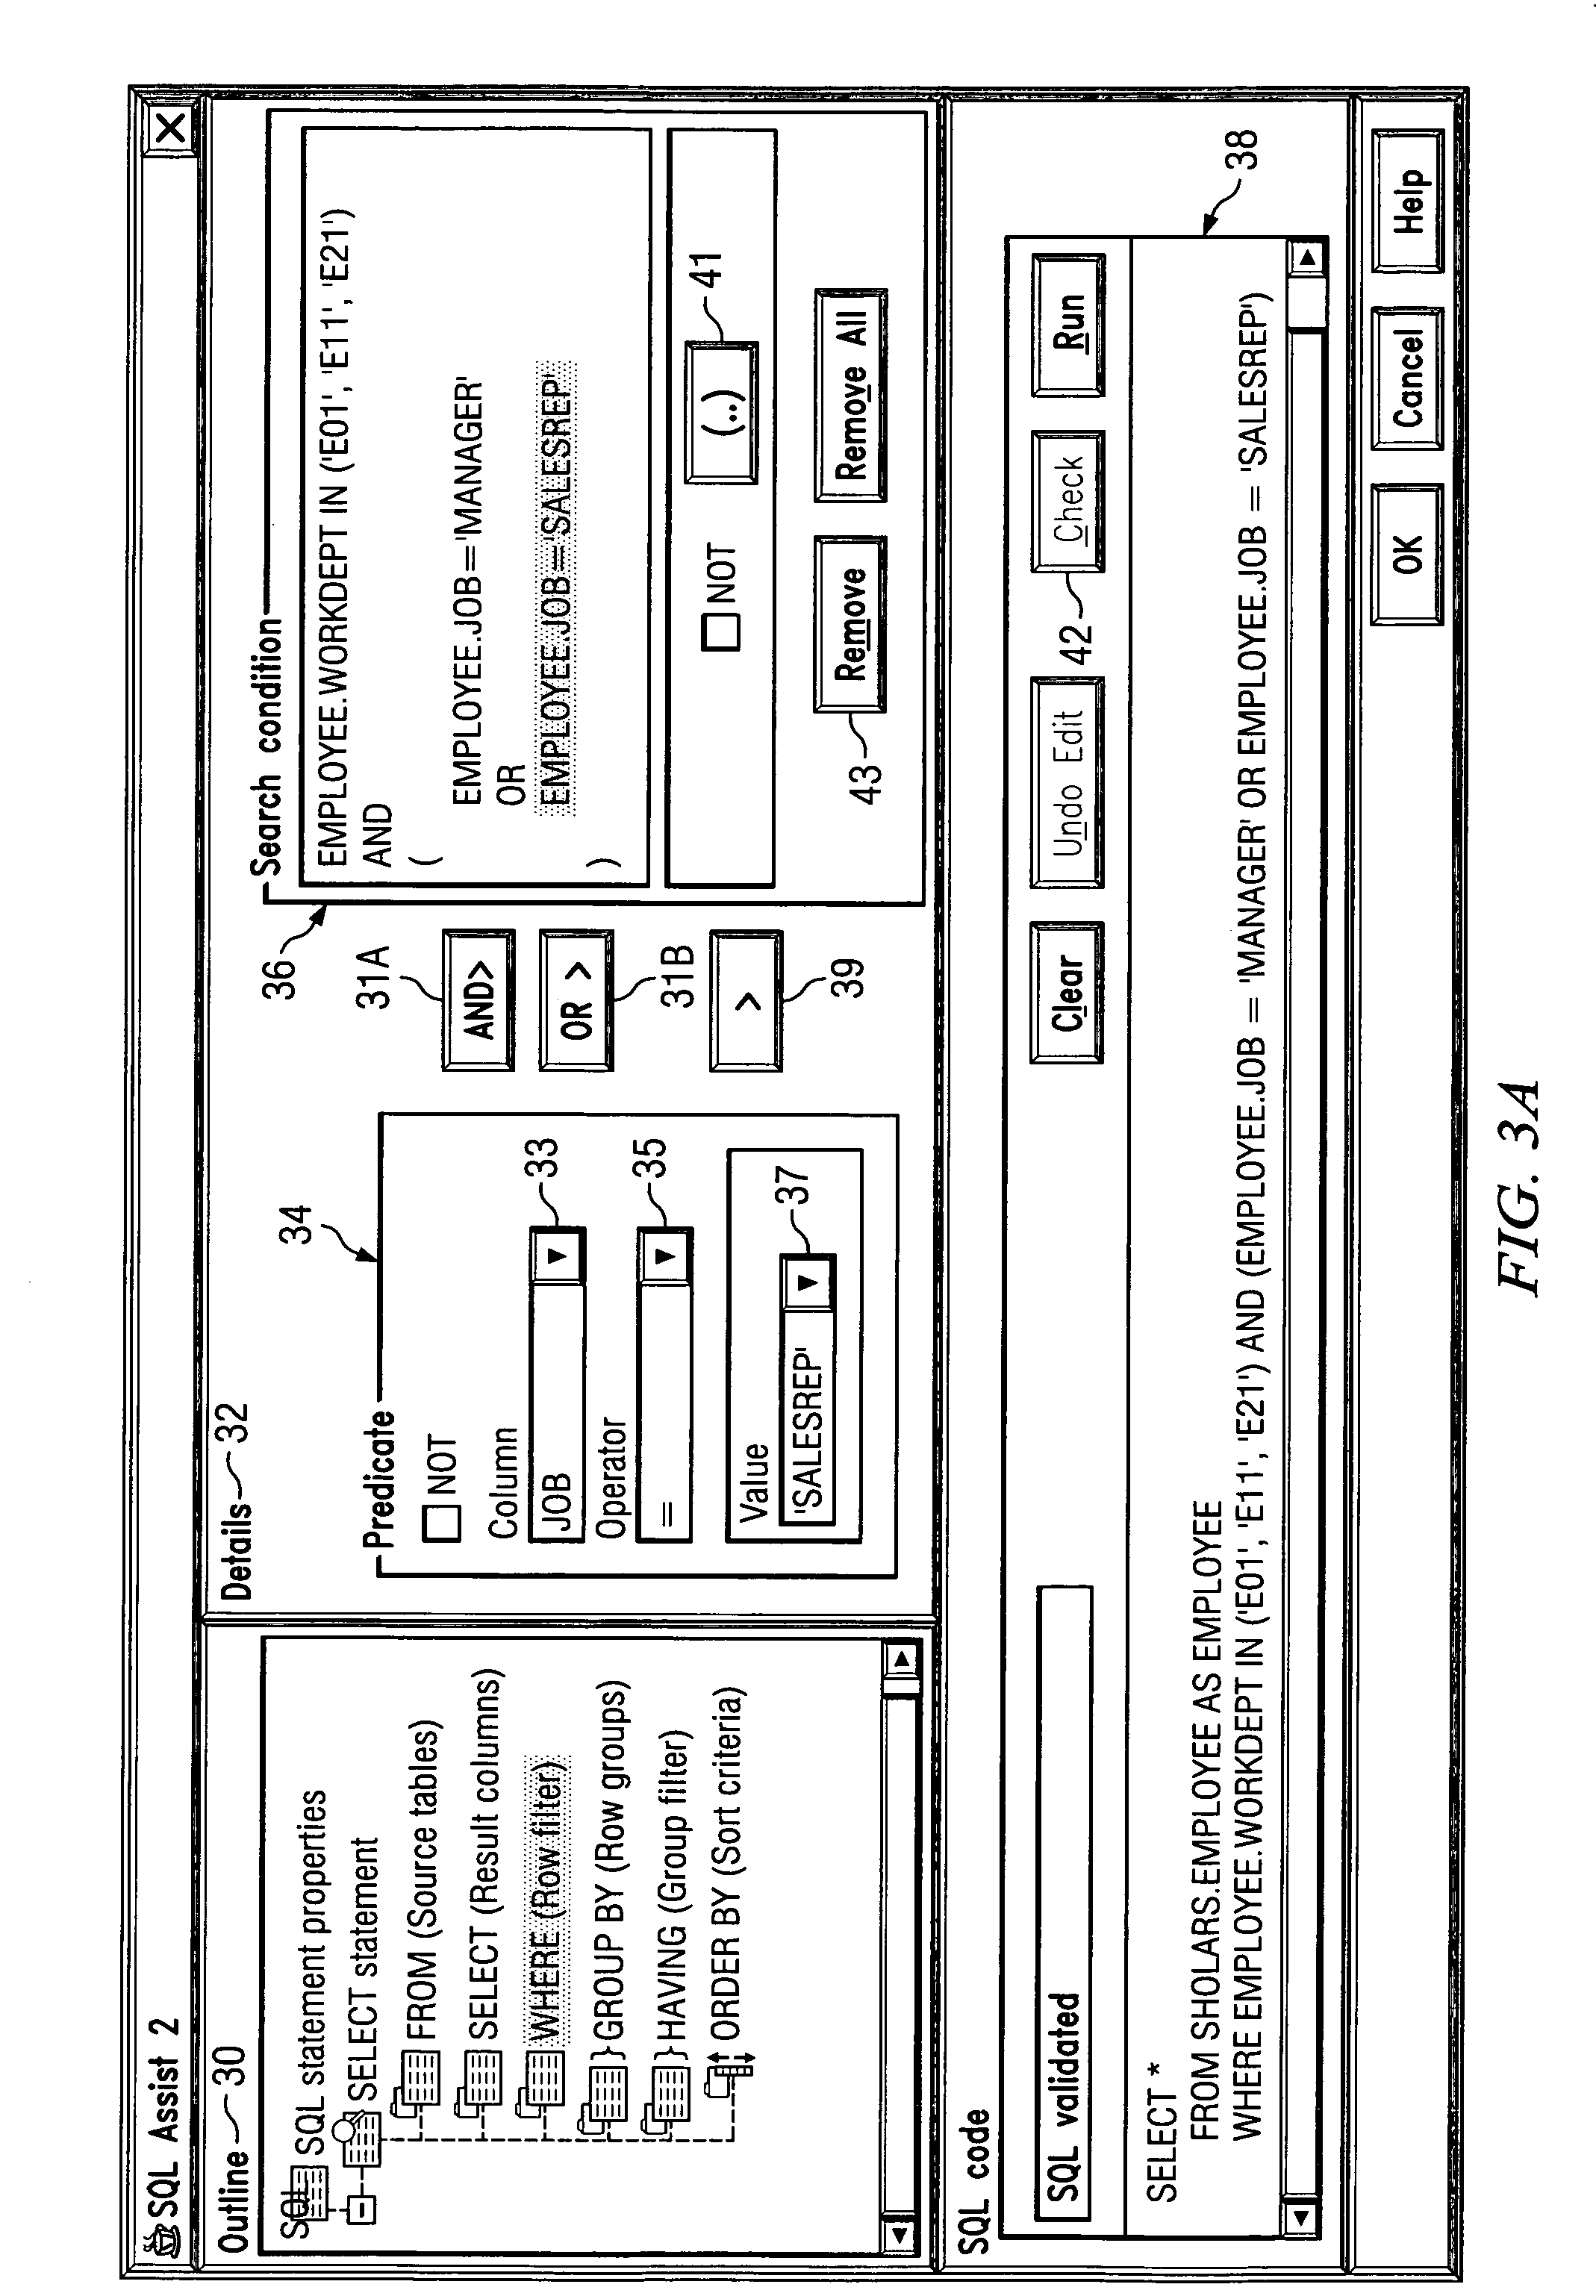 Query modelling tool having a dynamically adaptive interface